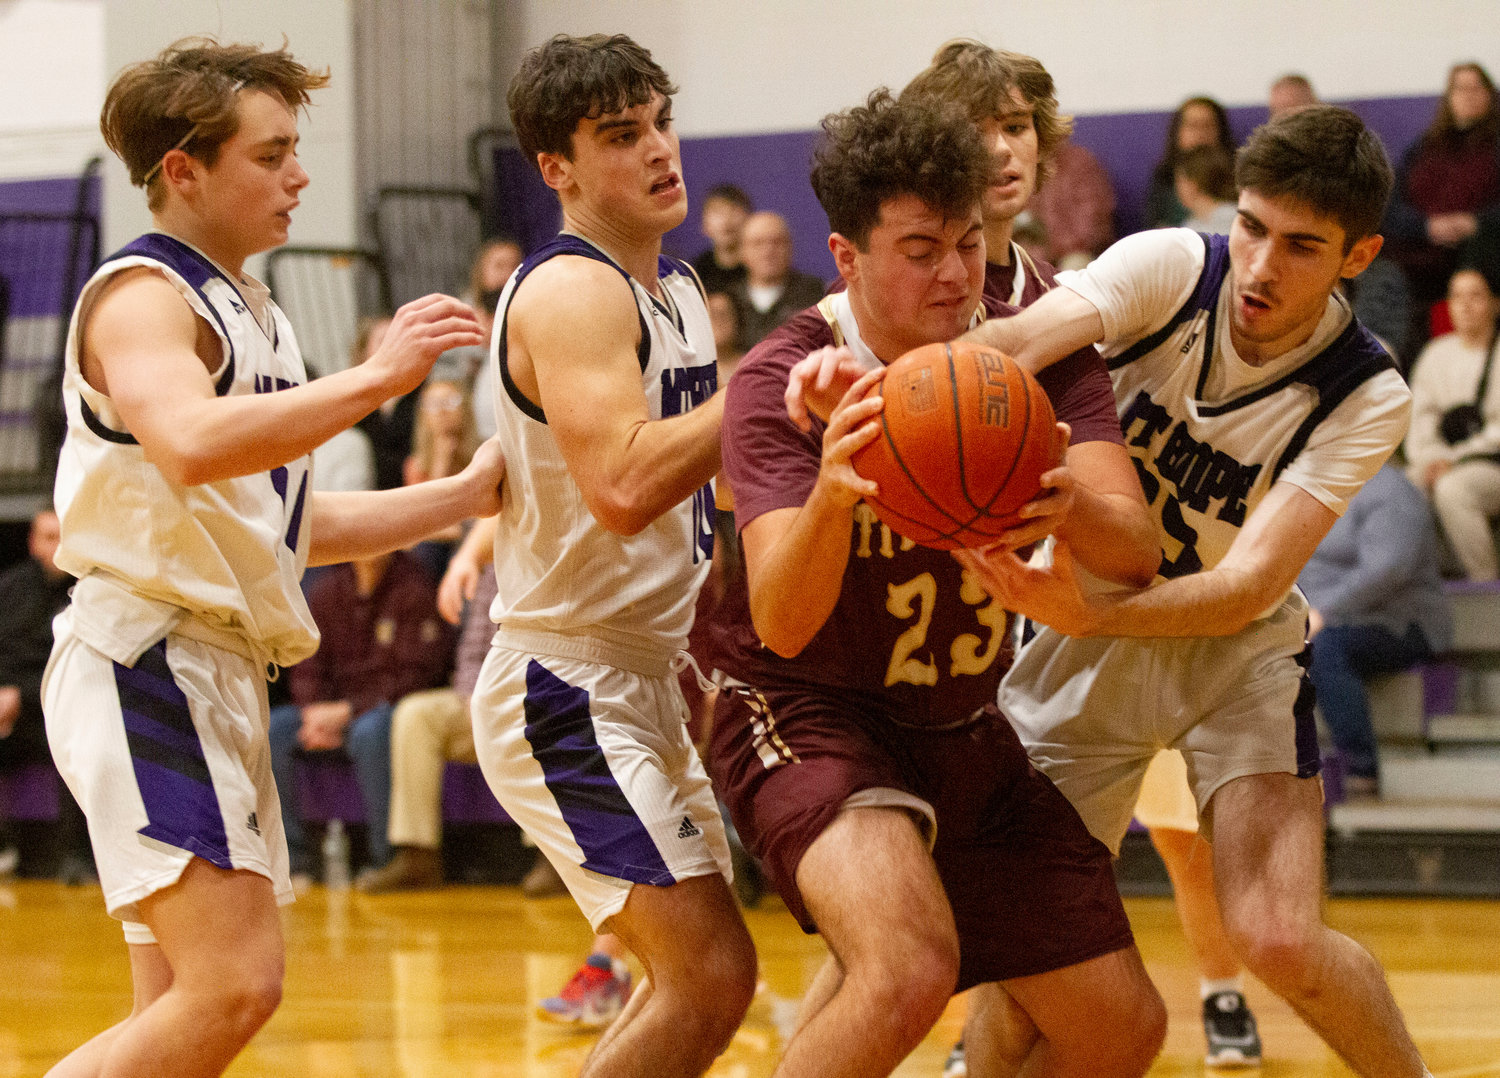 Huskies defenders Matt MacDougall, Ben Calouro and James Rustici fight for a rebound with Tiverton's Ryan Poland.